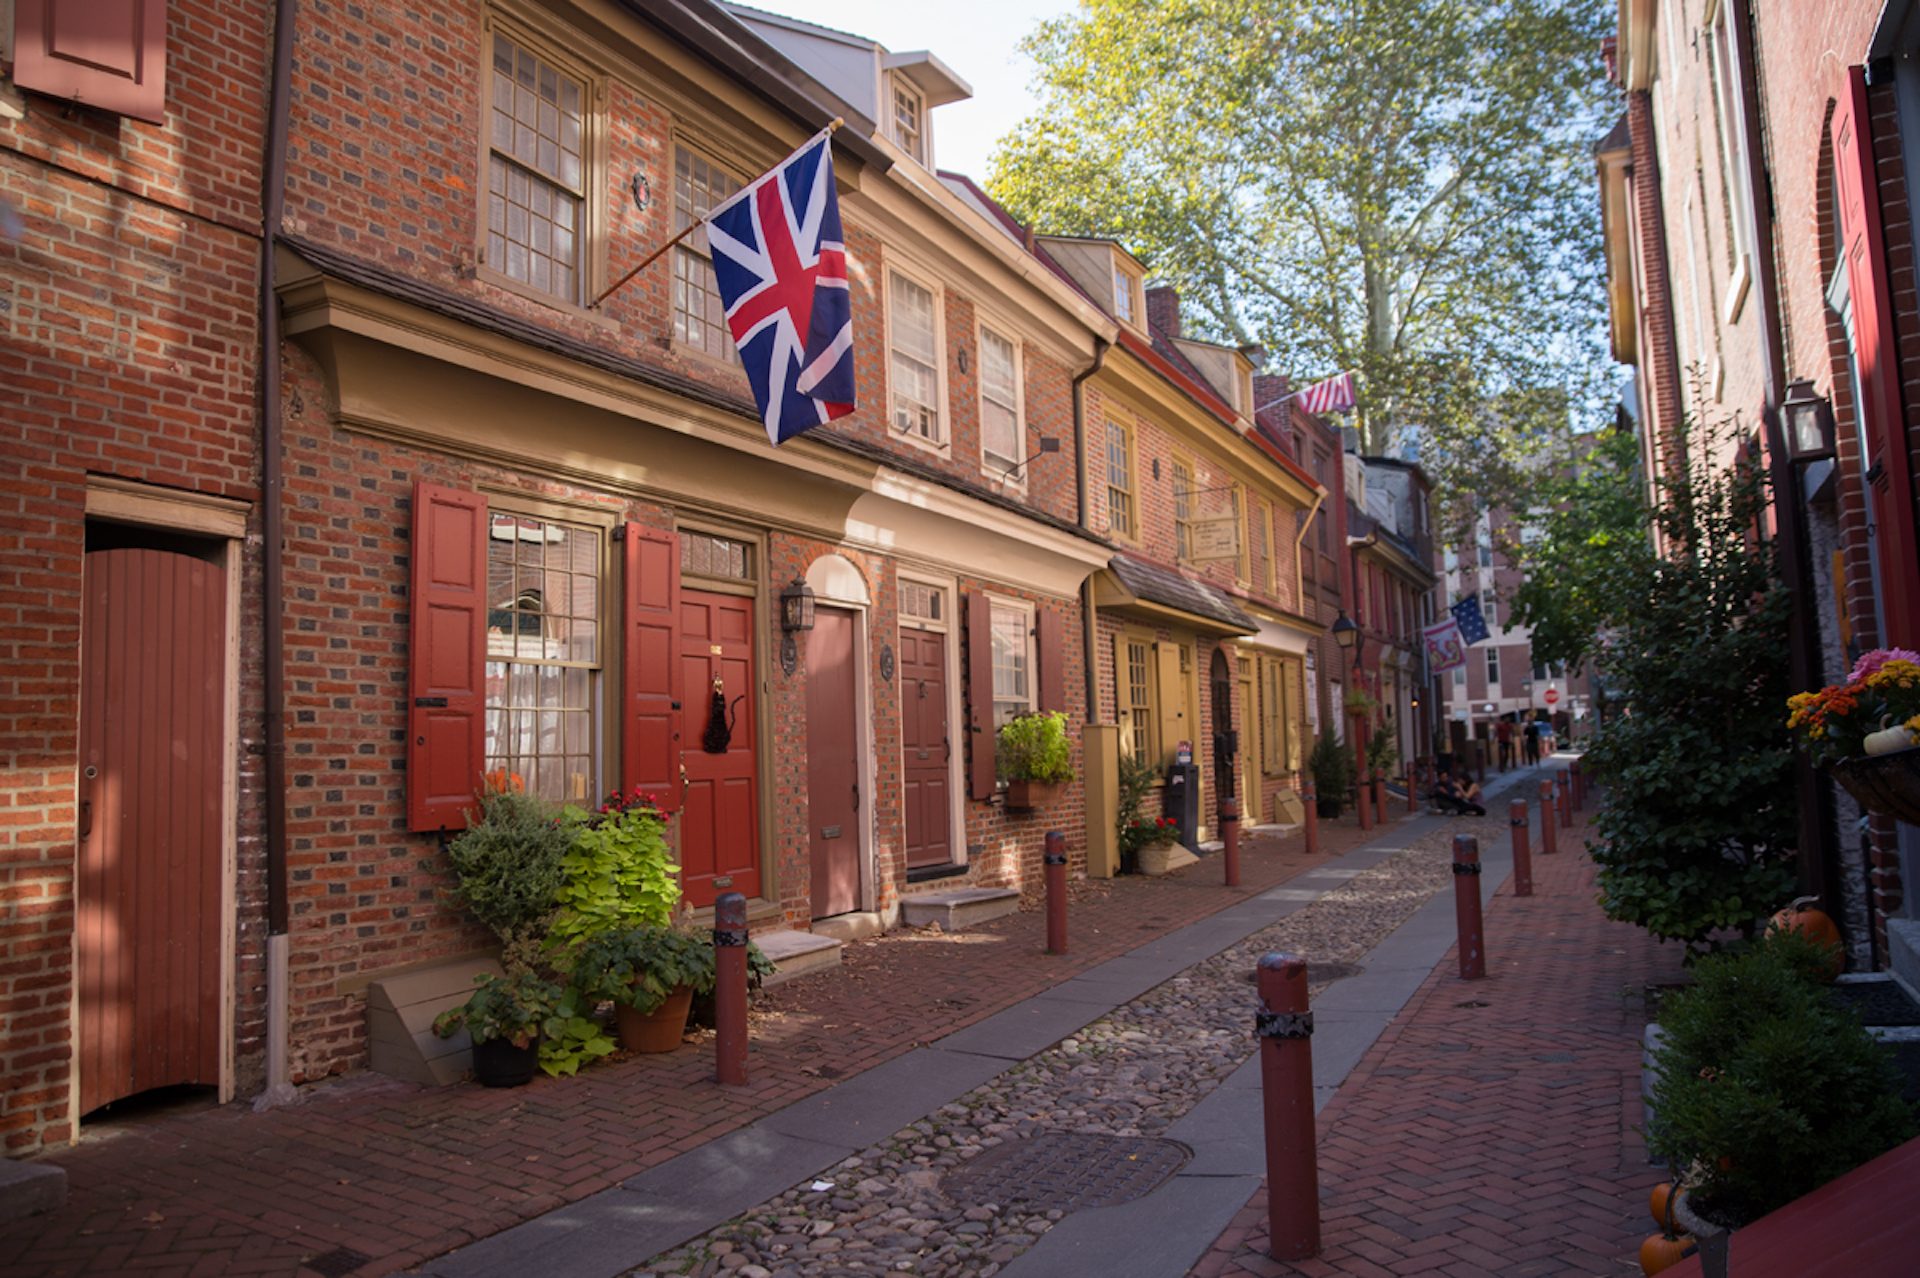 Elfreth’s Alley in Philadelphia’s Old City neighborhood is a National Historic Landmark and known as “Our nation’s oldest residential street.”